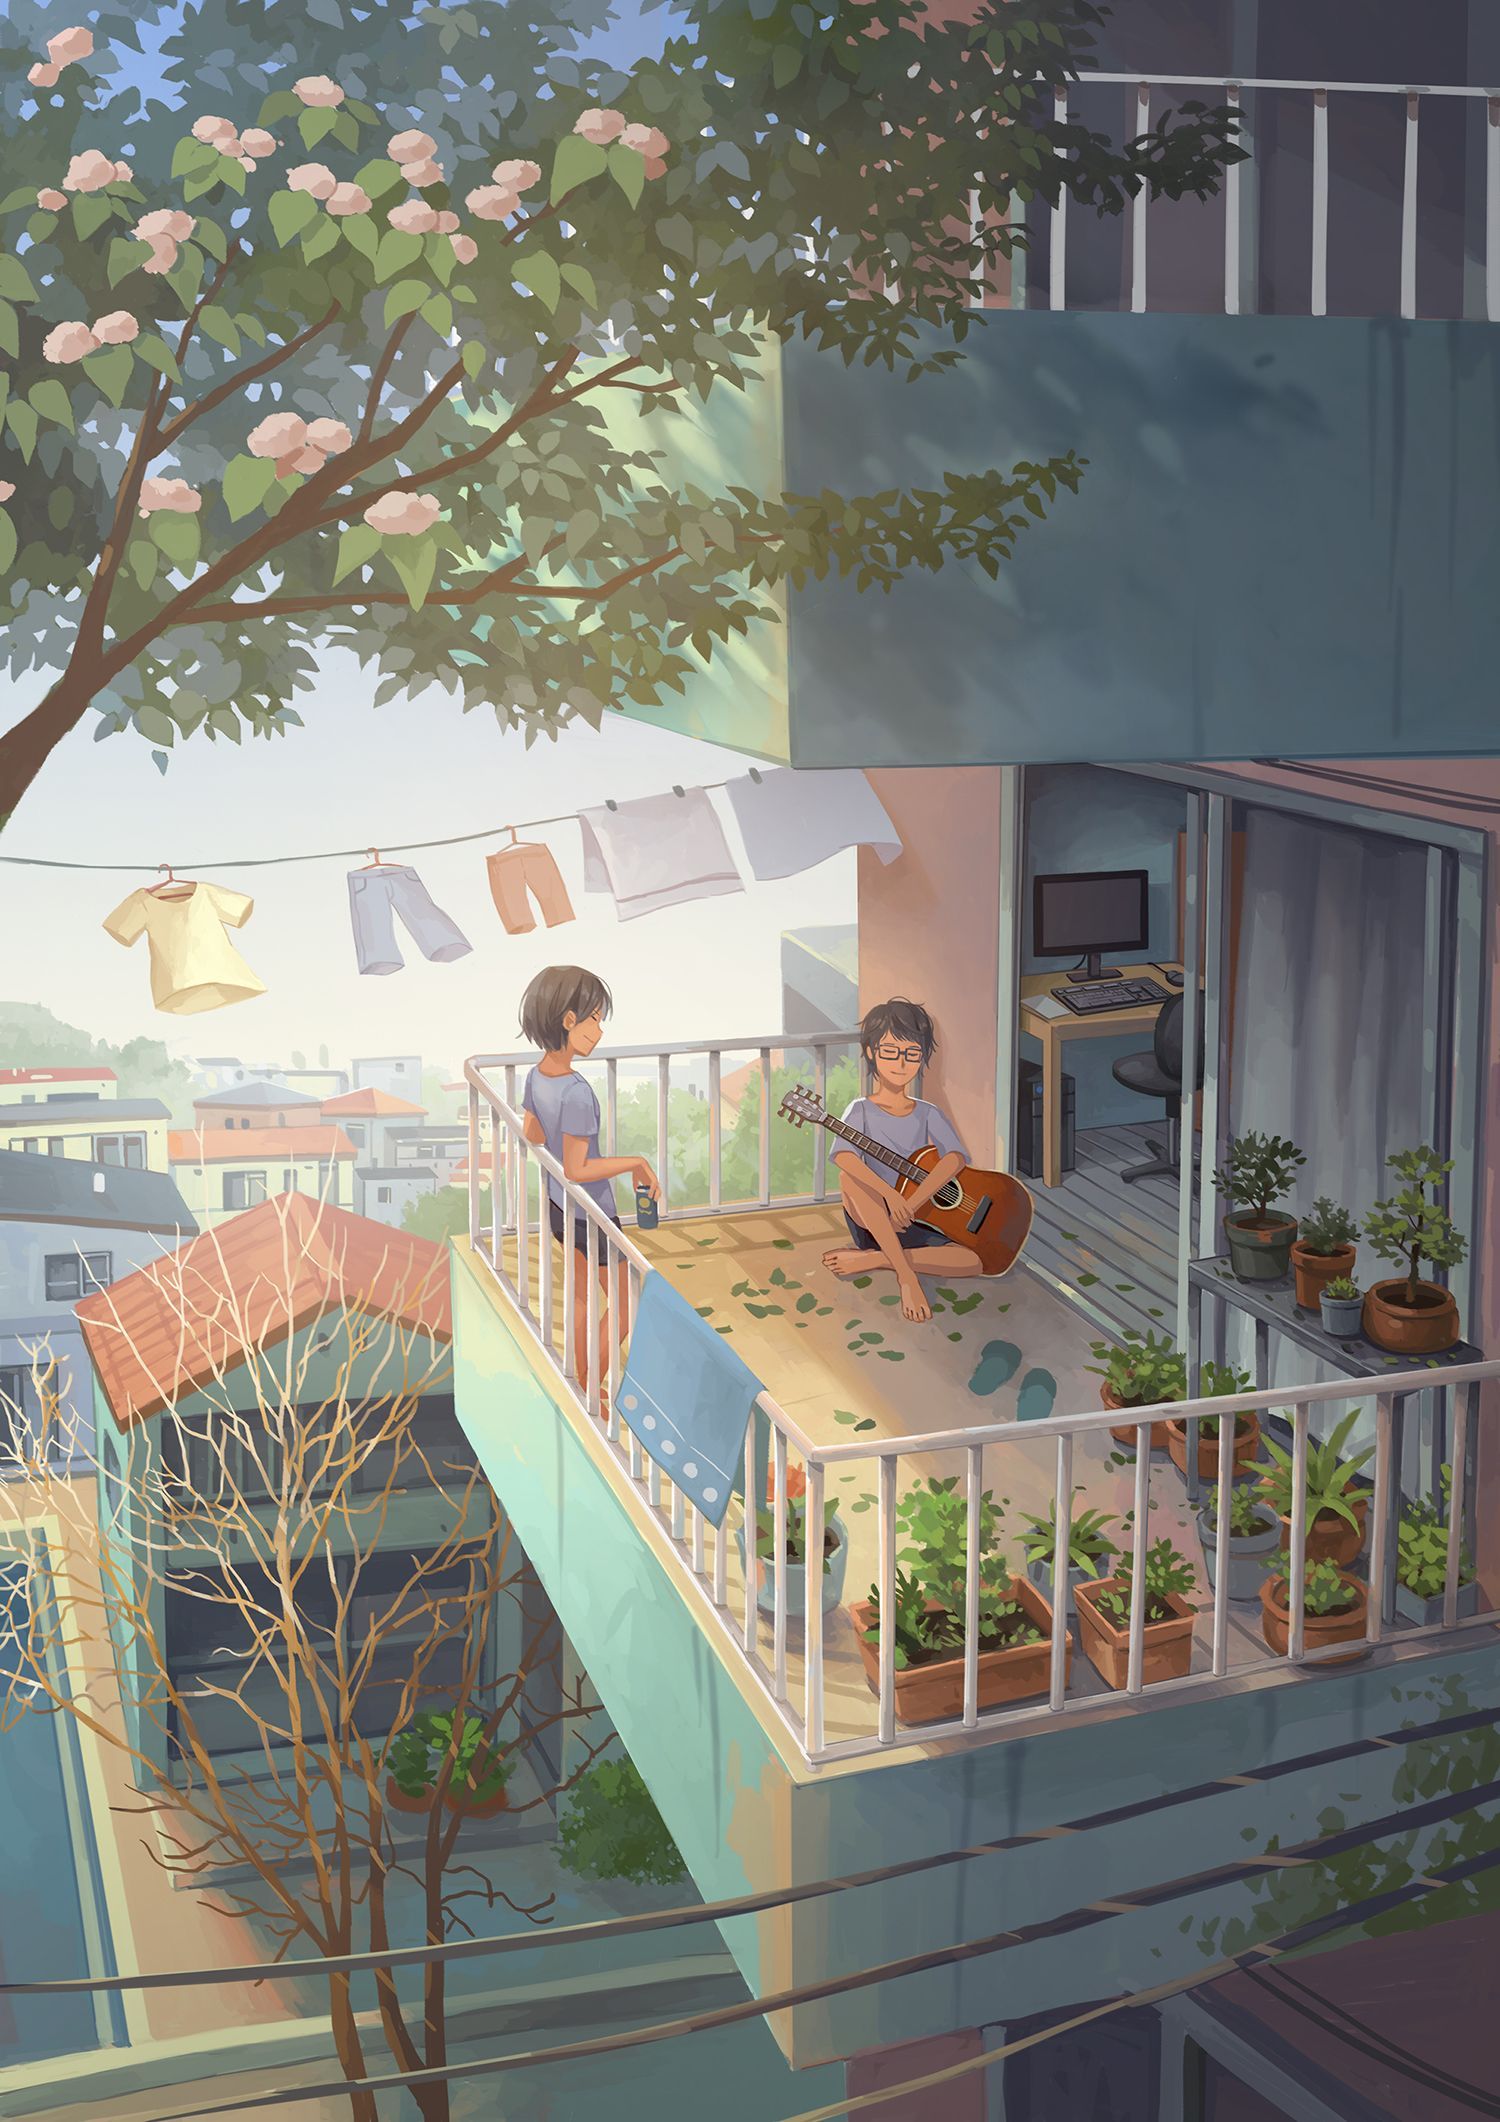 illustrative drawings: Search Result. Dreamy art, Anime scenery wallpaper, Anime scenery